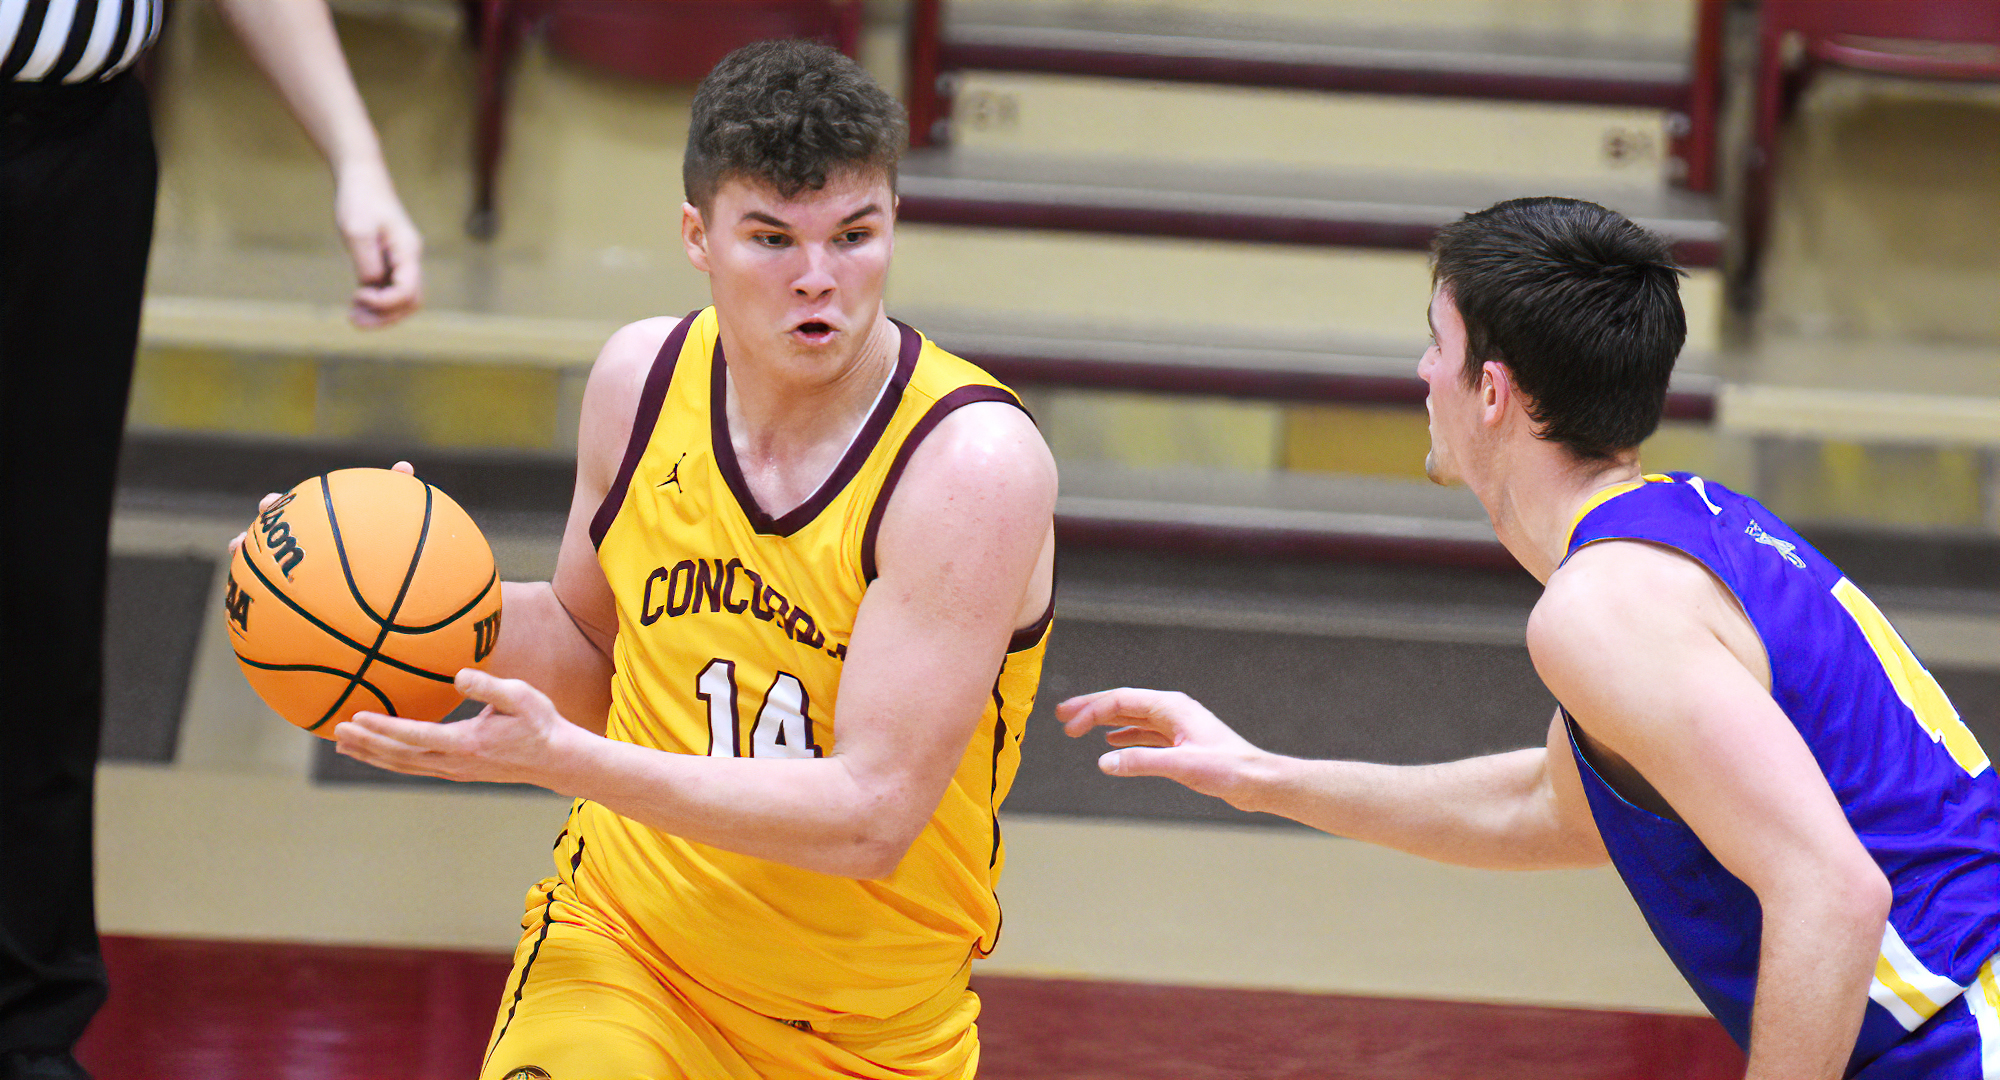 Freshman Rowan Nelson had a team-high 18 points in the Cobbers' game at Augsburg. He is seventh in the MIAC in scoring average this year.